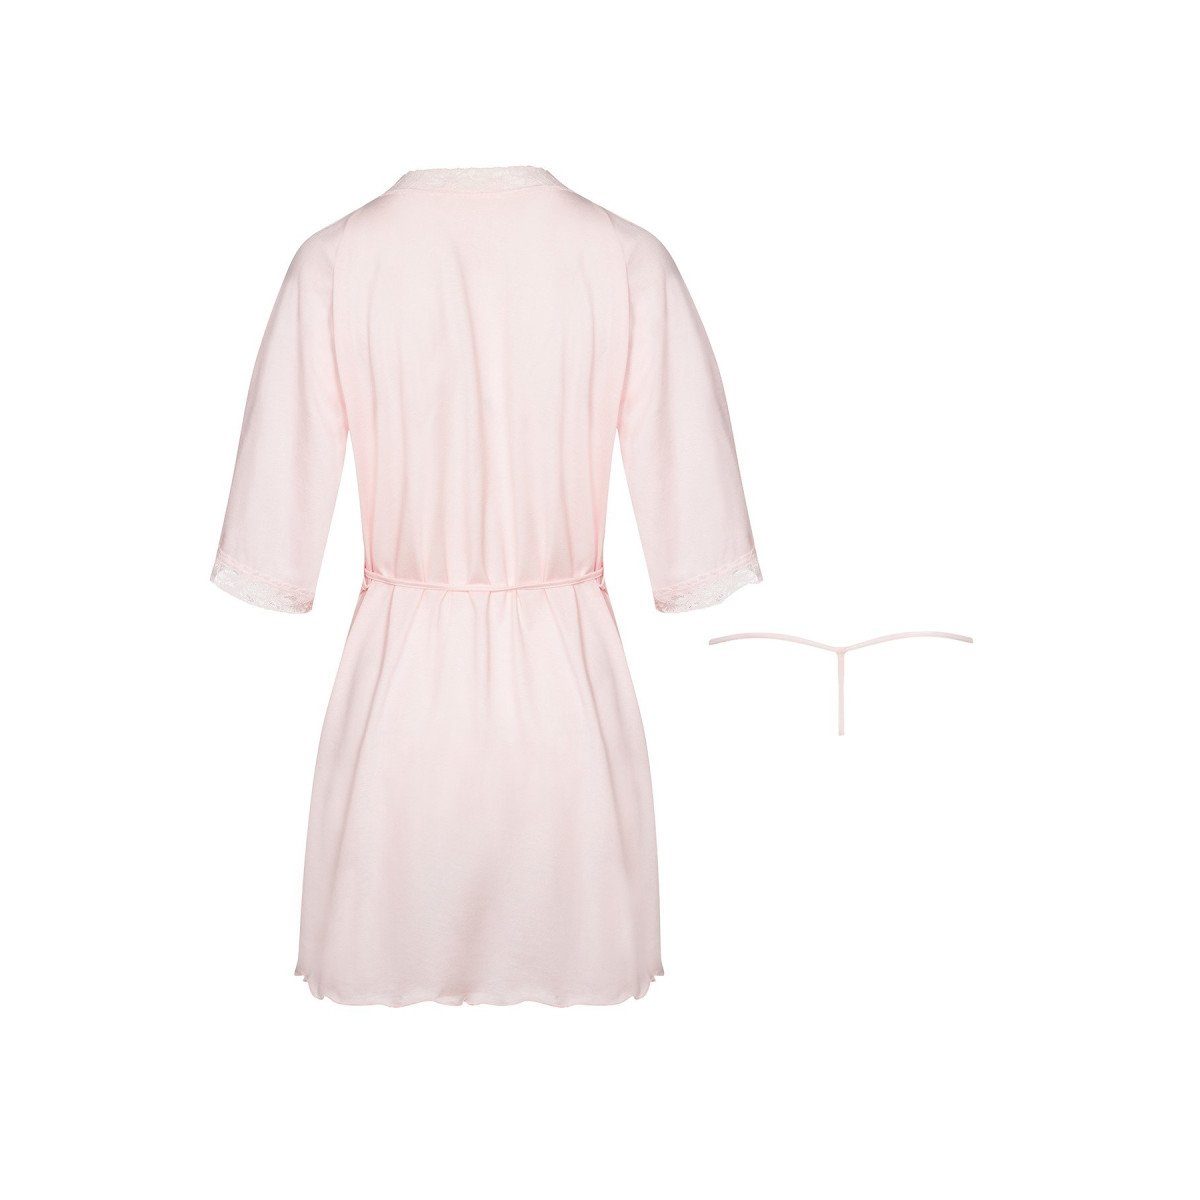 - BN Dressing (L/XL,S/M) Night Nachthemd Beauty Gown pink Marcy Fashion